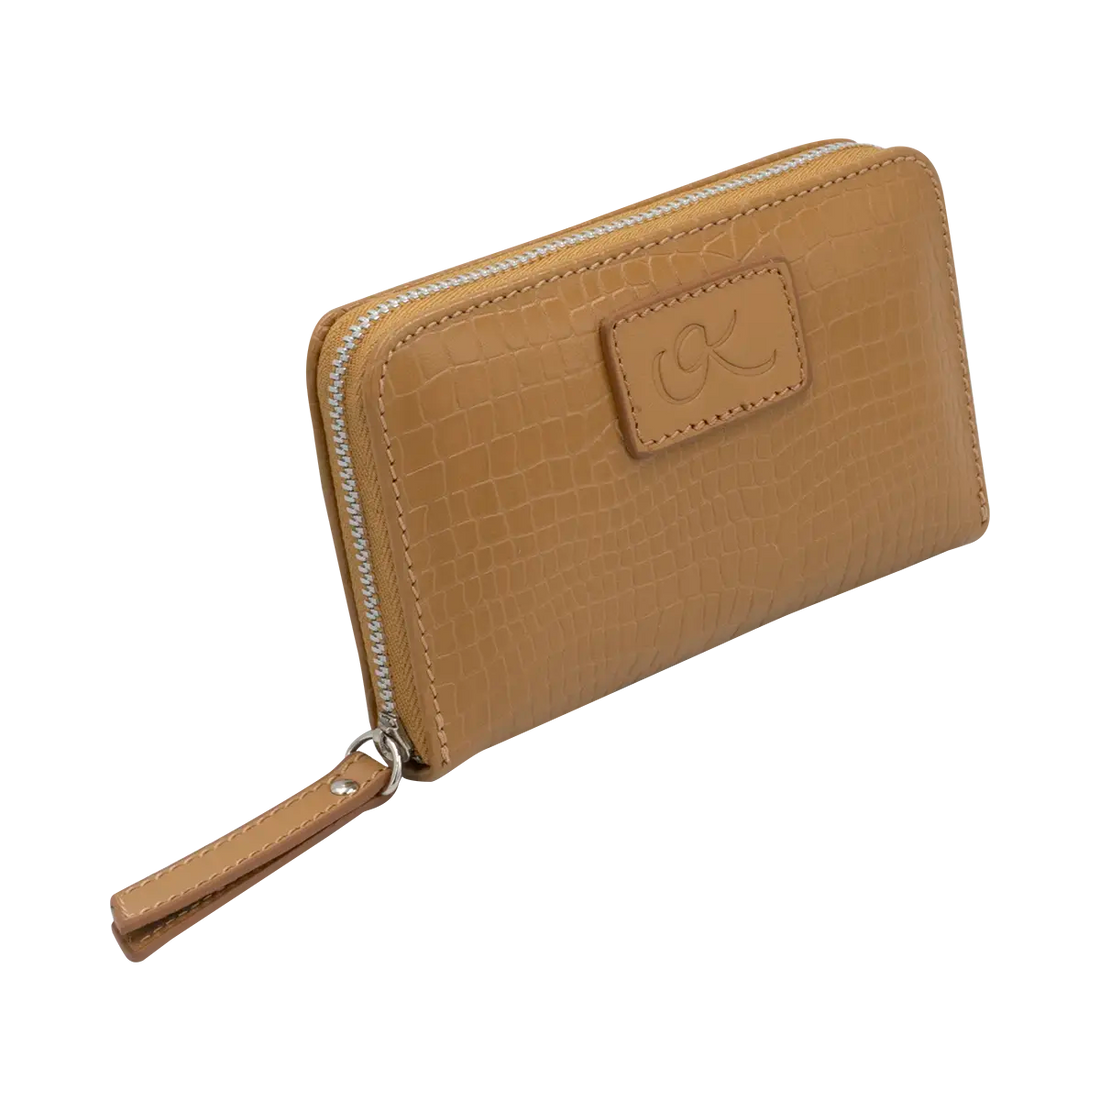 small tan print leather wallet. Fashion Accessories for women in San Diego, CA.